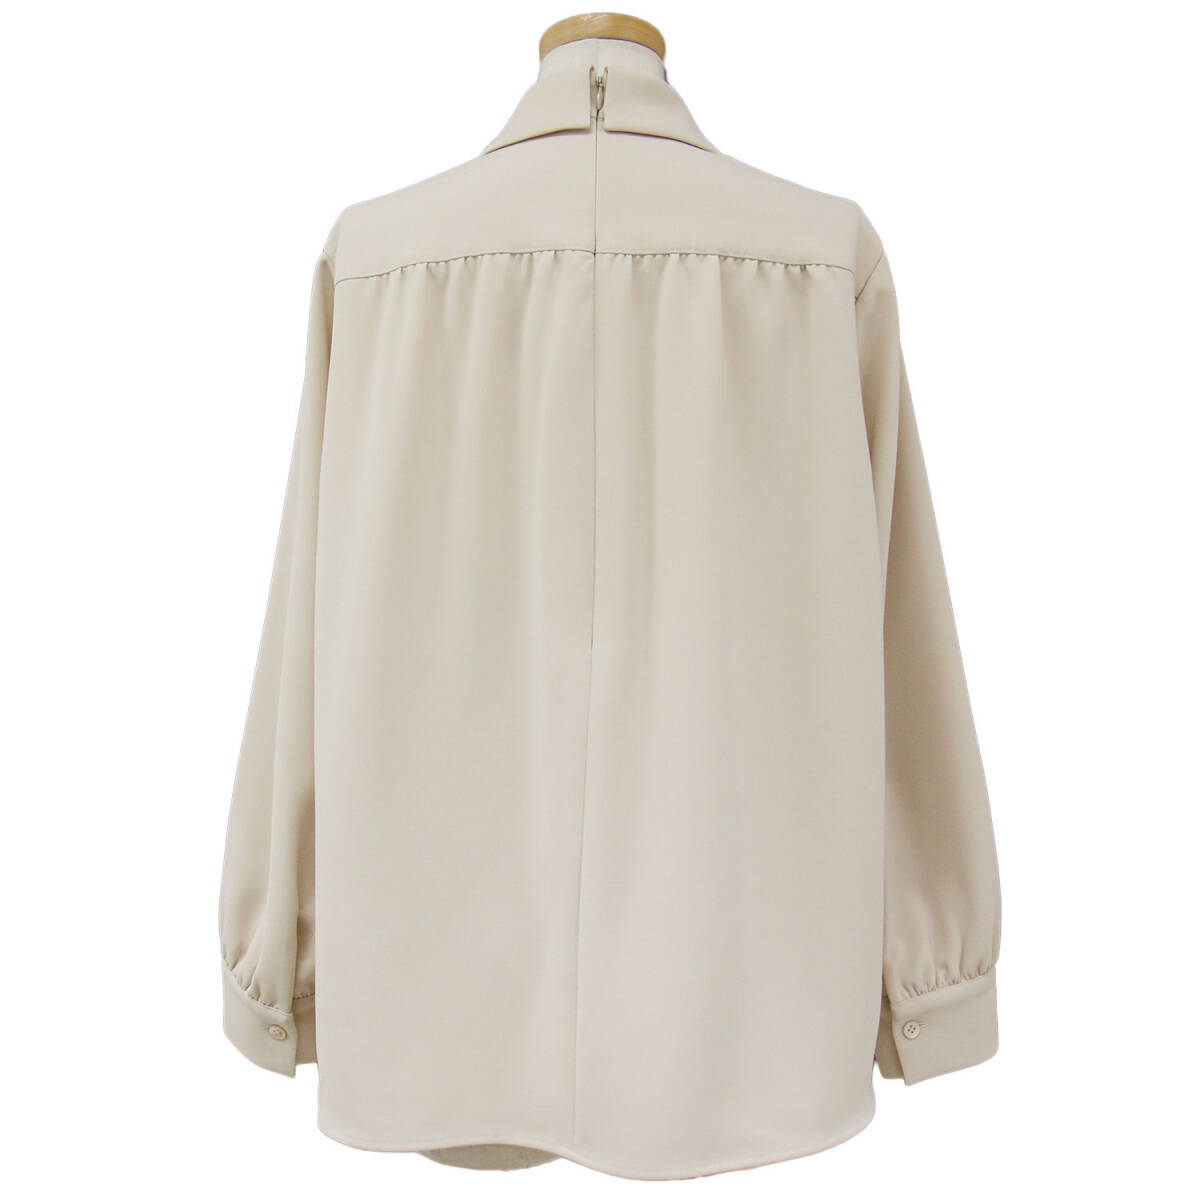  beautiful goods theory luxe theory ryuks blouse 24 spring summer beige 3 8(M) washer bru Inver dead pleat two -ply woven material long sleeve tops 